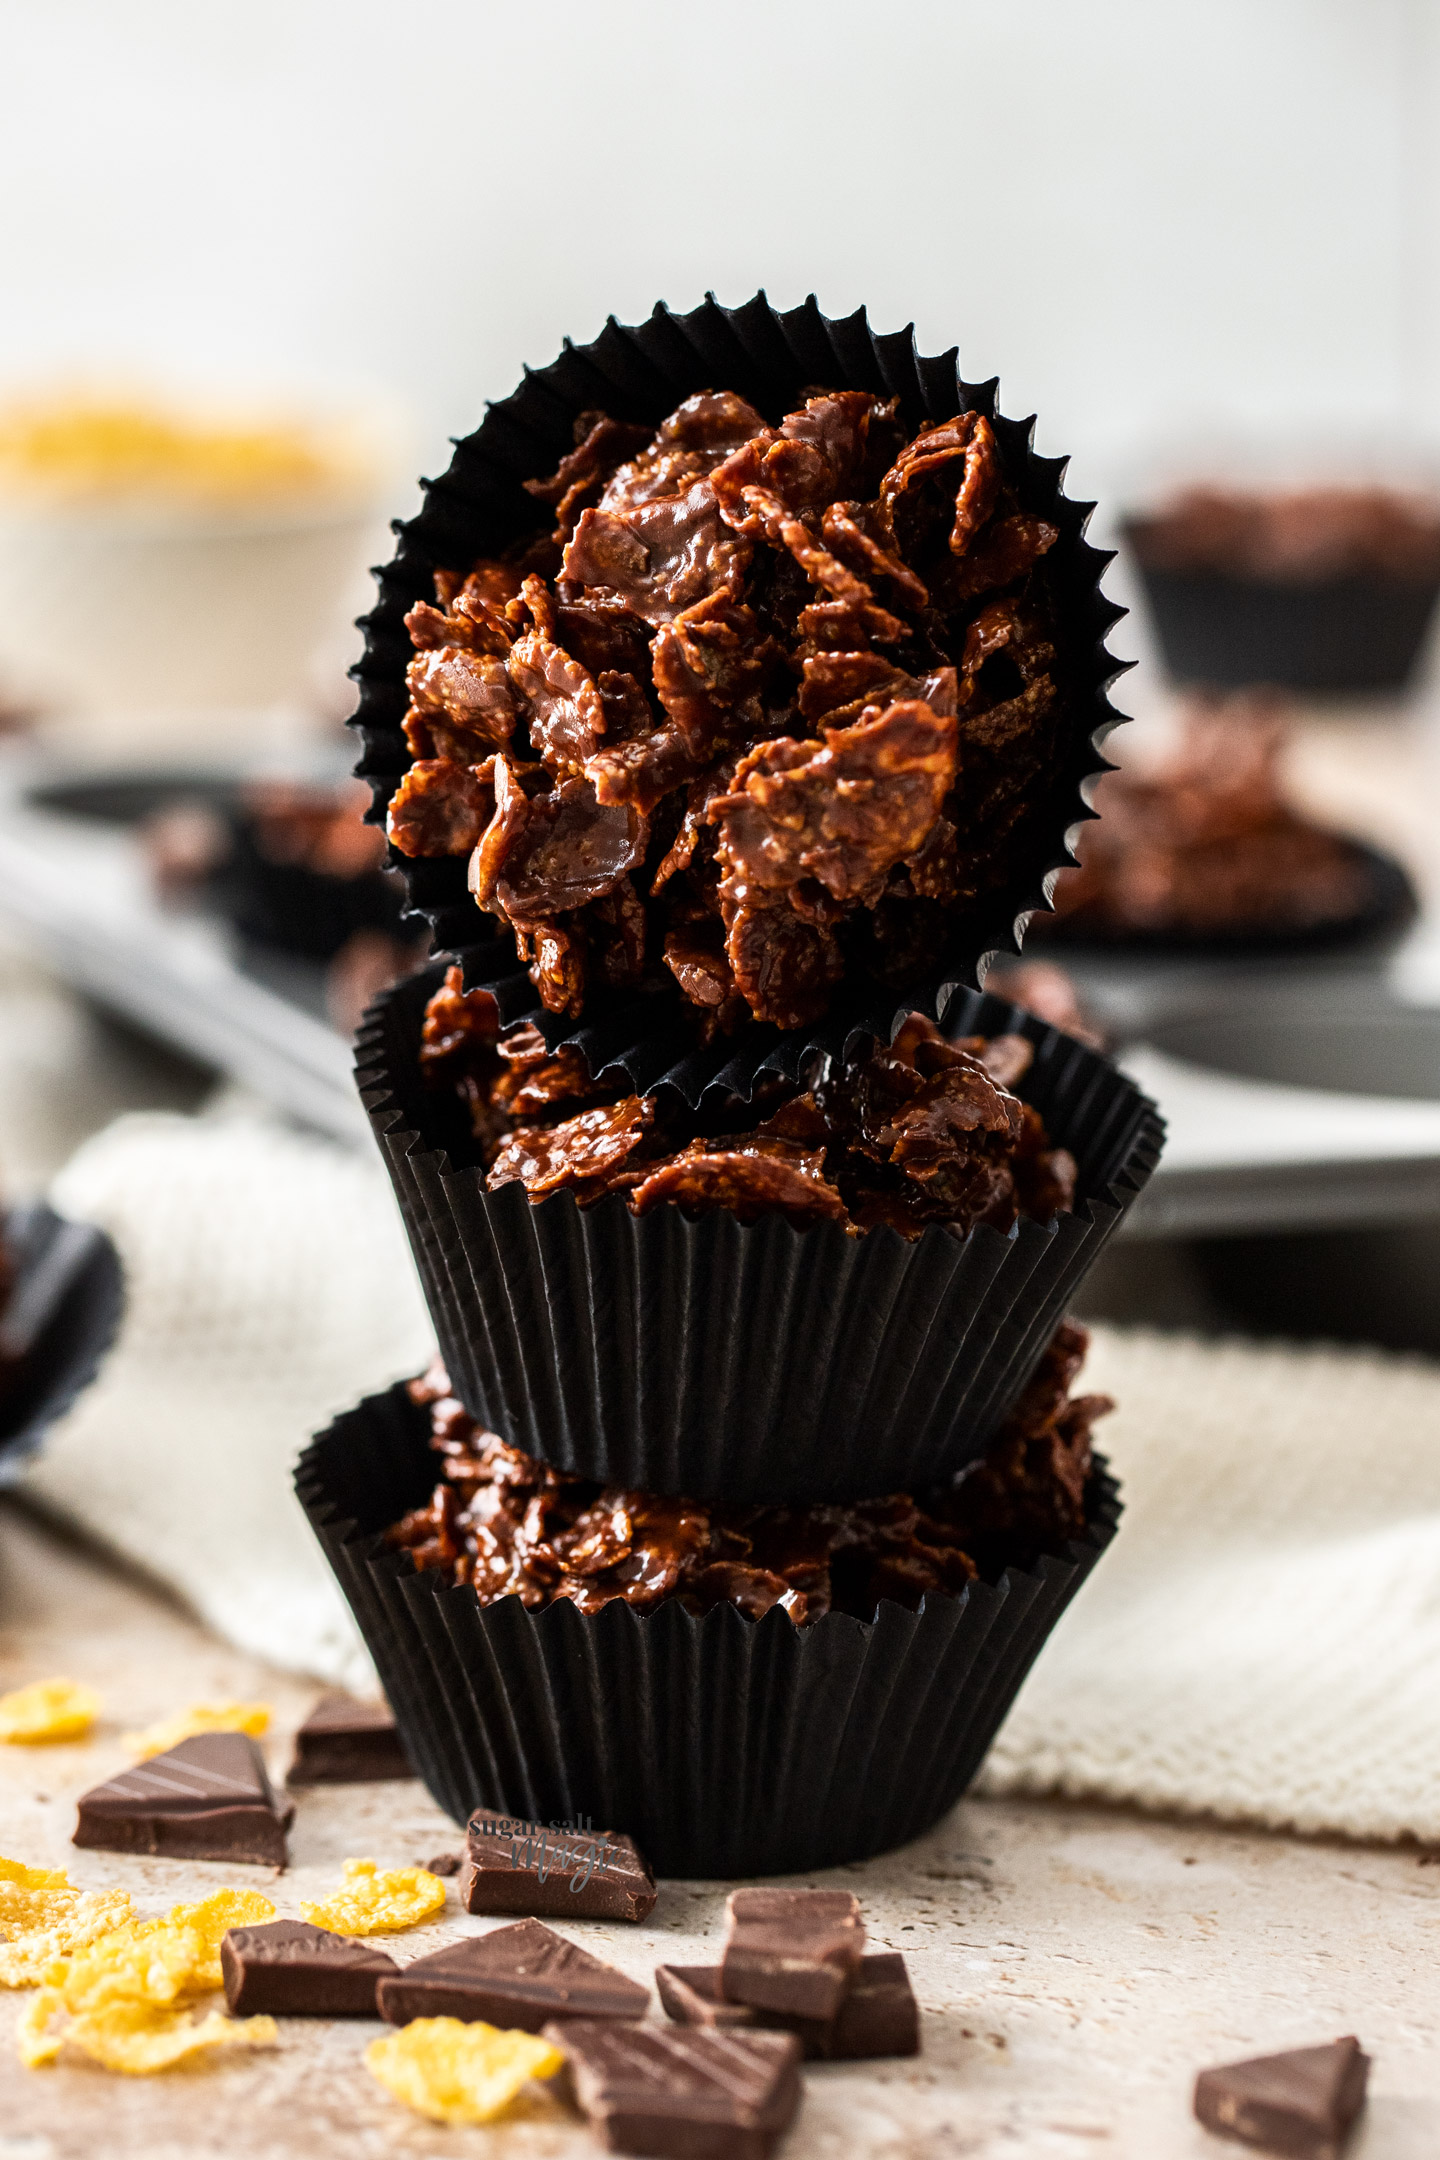 A stack of 3 chocolate cornflake cakes.